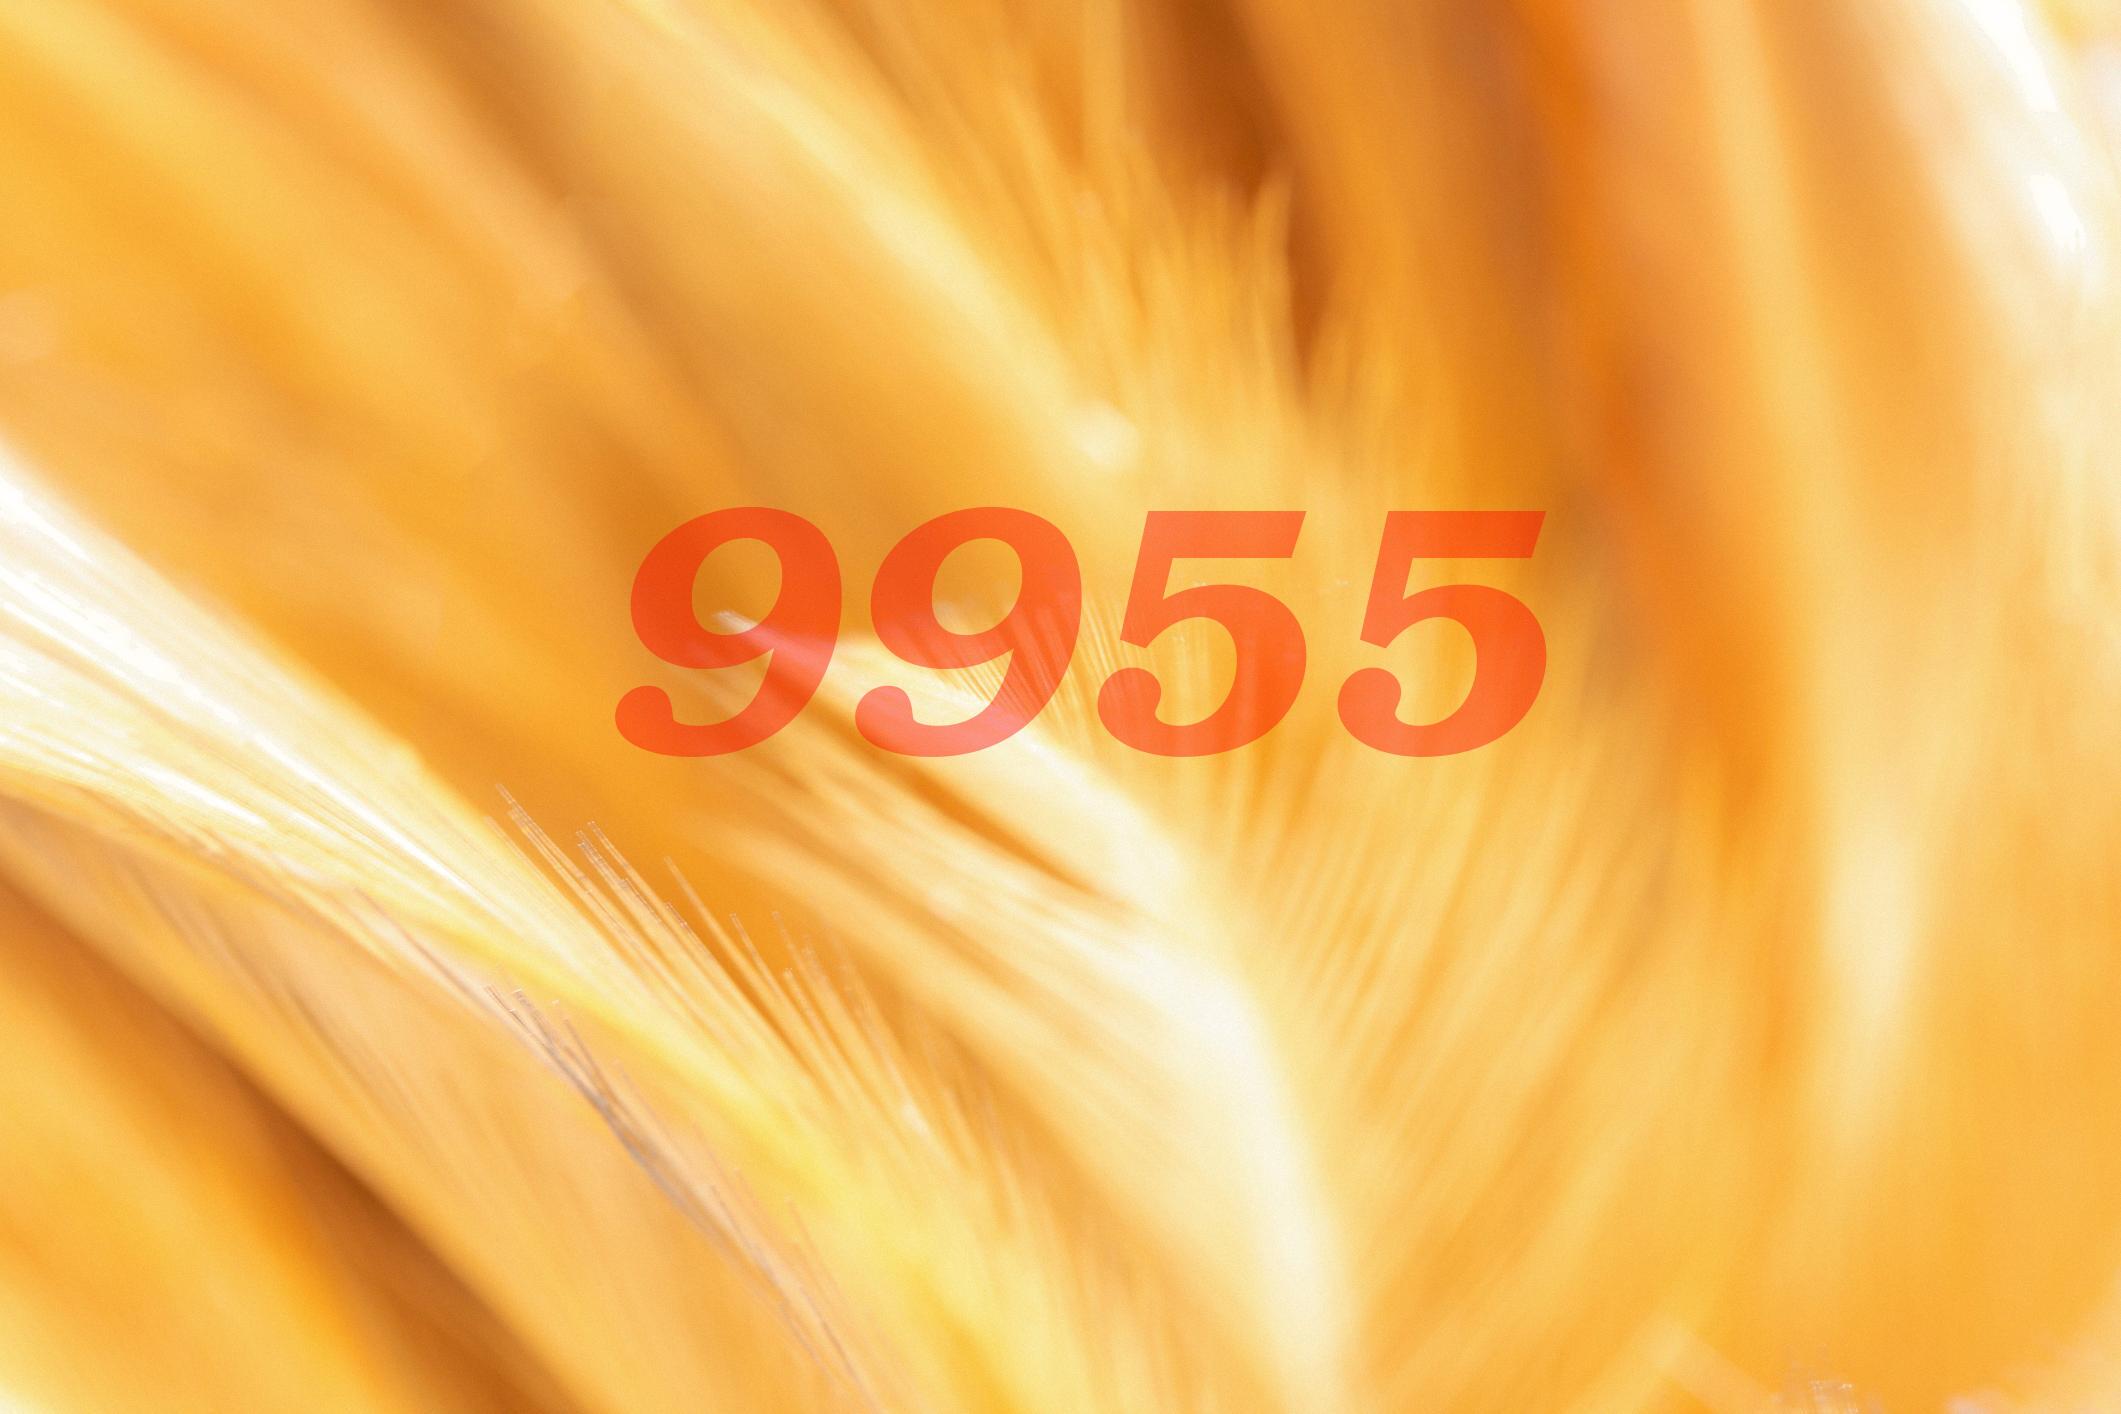 The Hidden Meaning Of Angel Number 9955 Revealed!